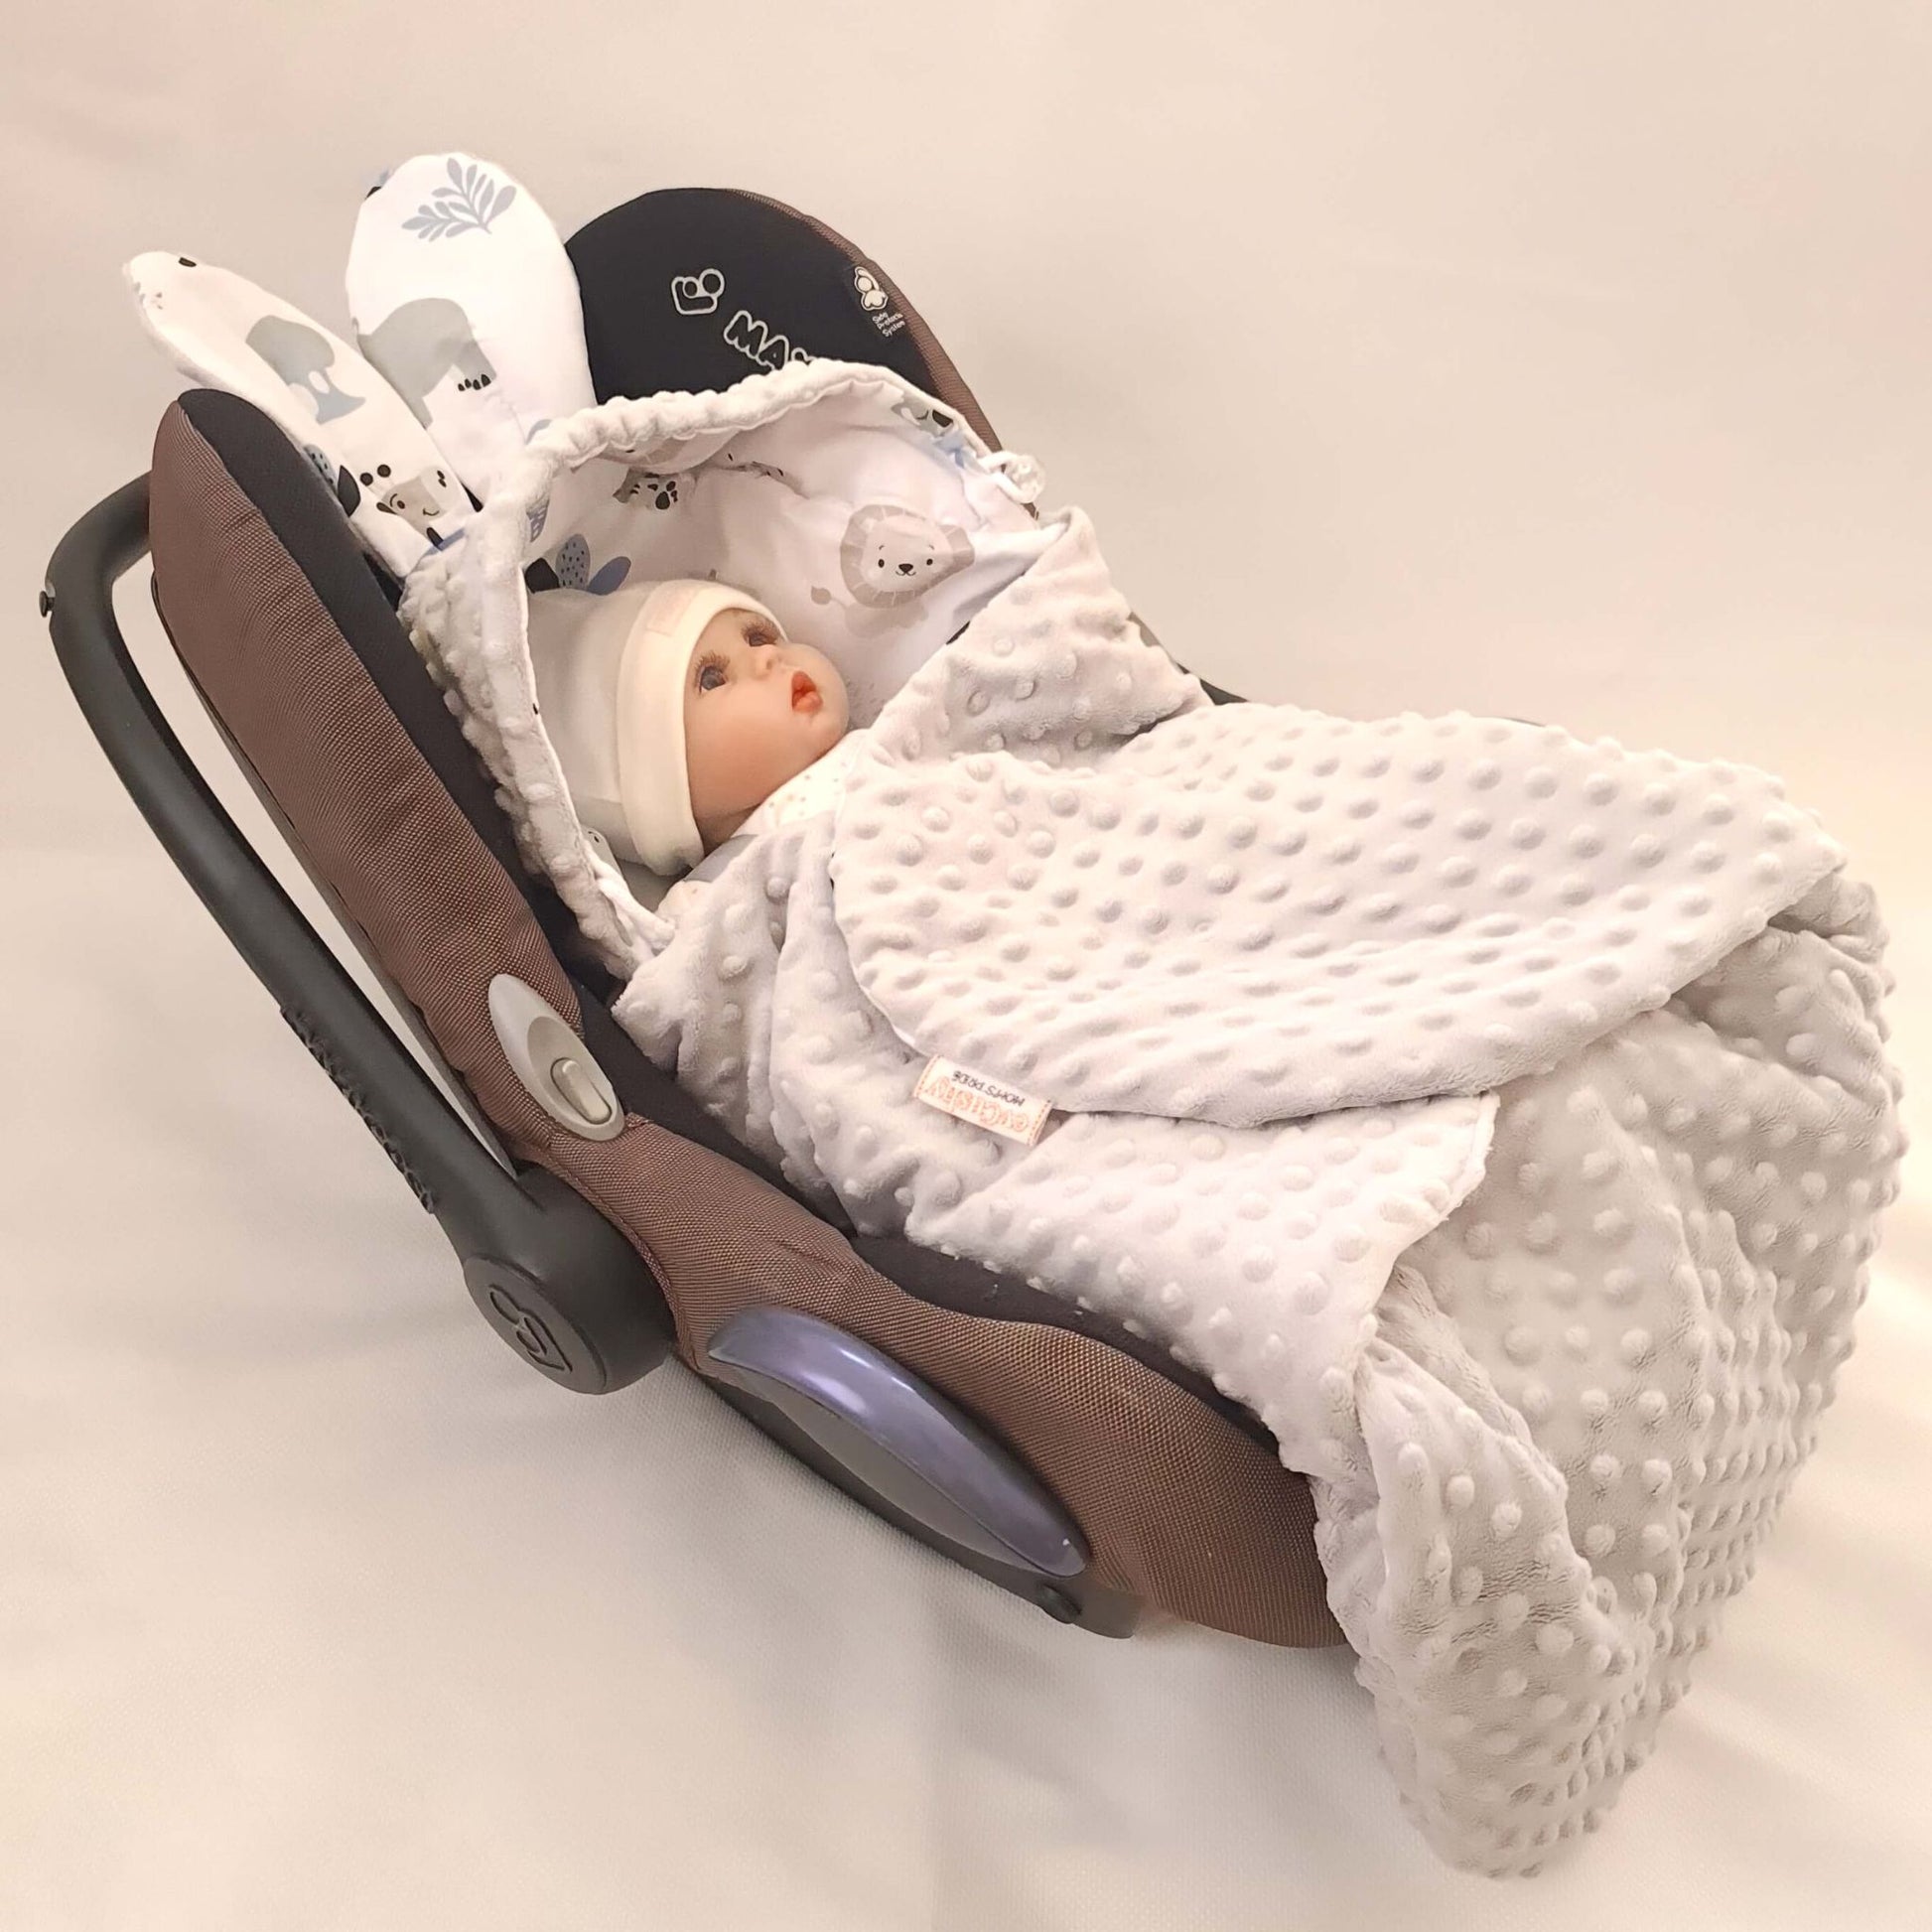 best blankets for new baby infants car seat blankets in ireland best swaddle for baby